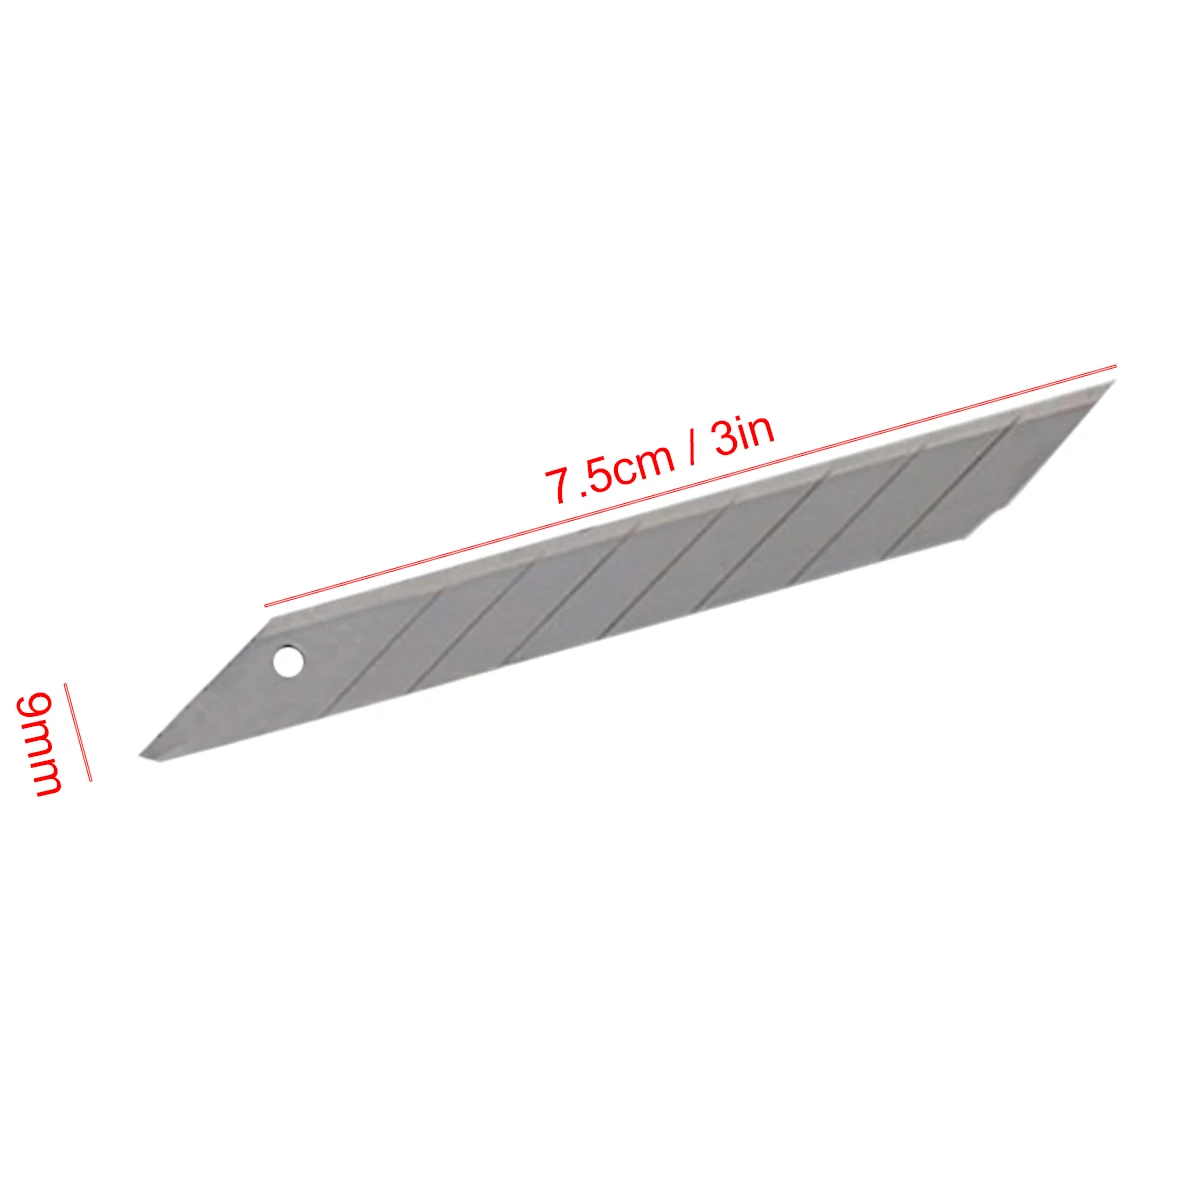 
10pcs/box Carbon Steel Art Knife Blades 30 Degree 8 Section Replacement Cutter Blade E03 